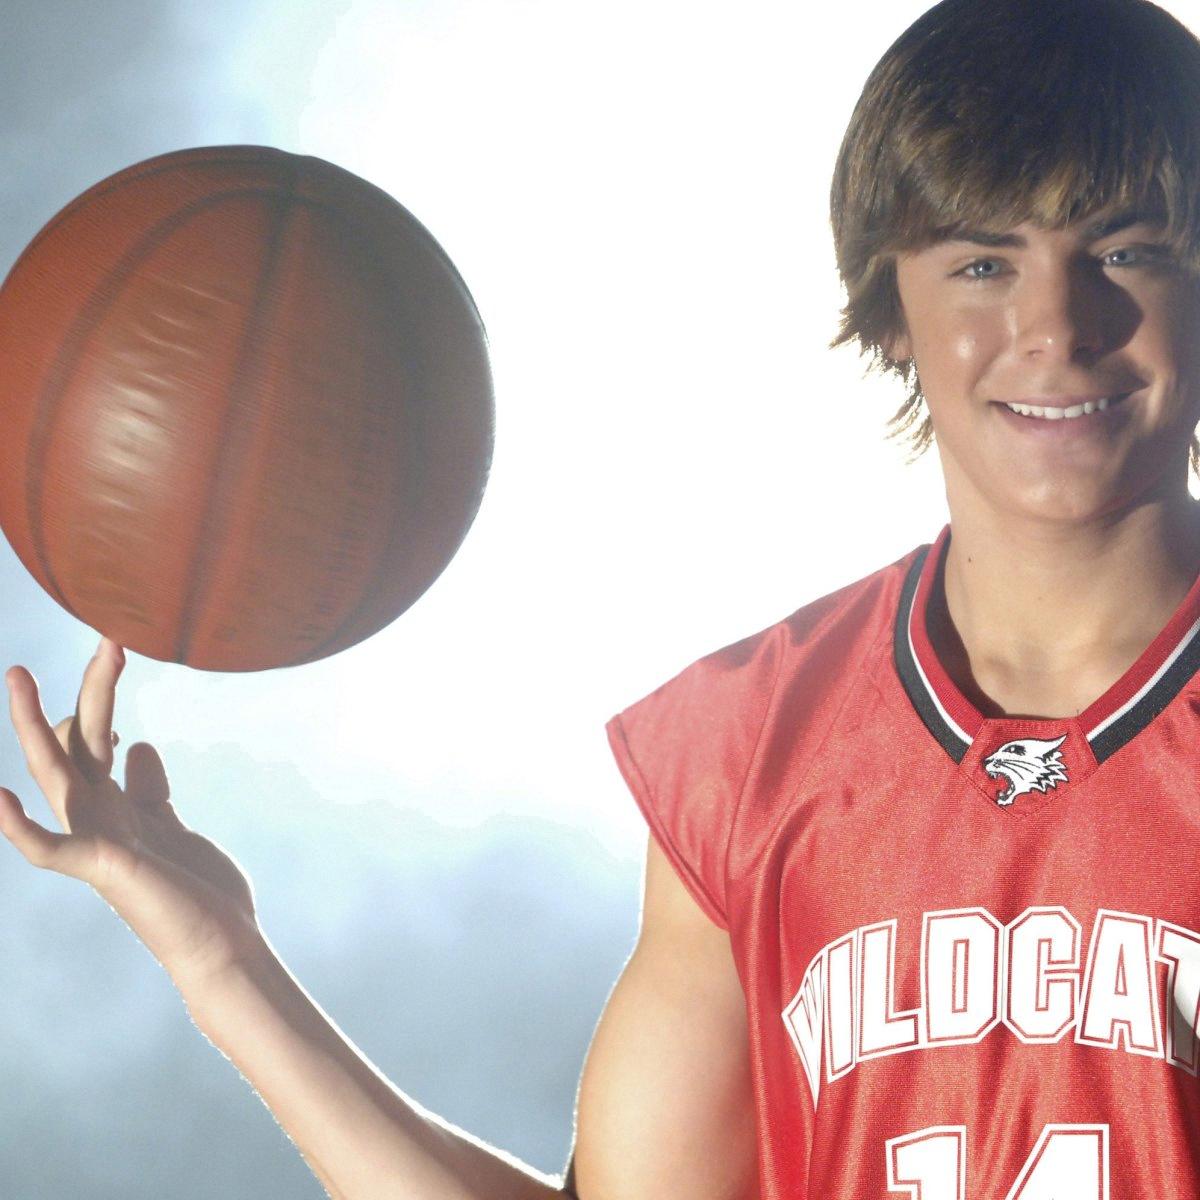 does zac efron sing in high school musical